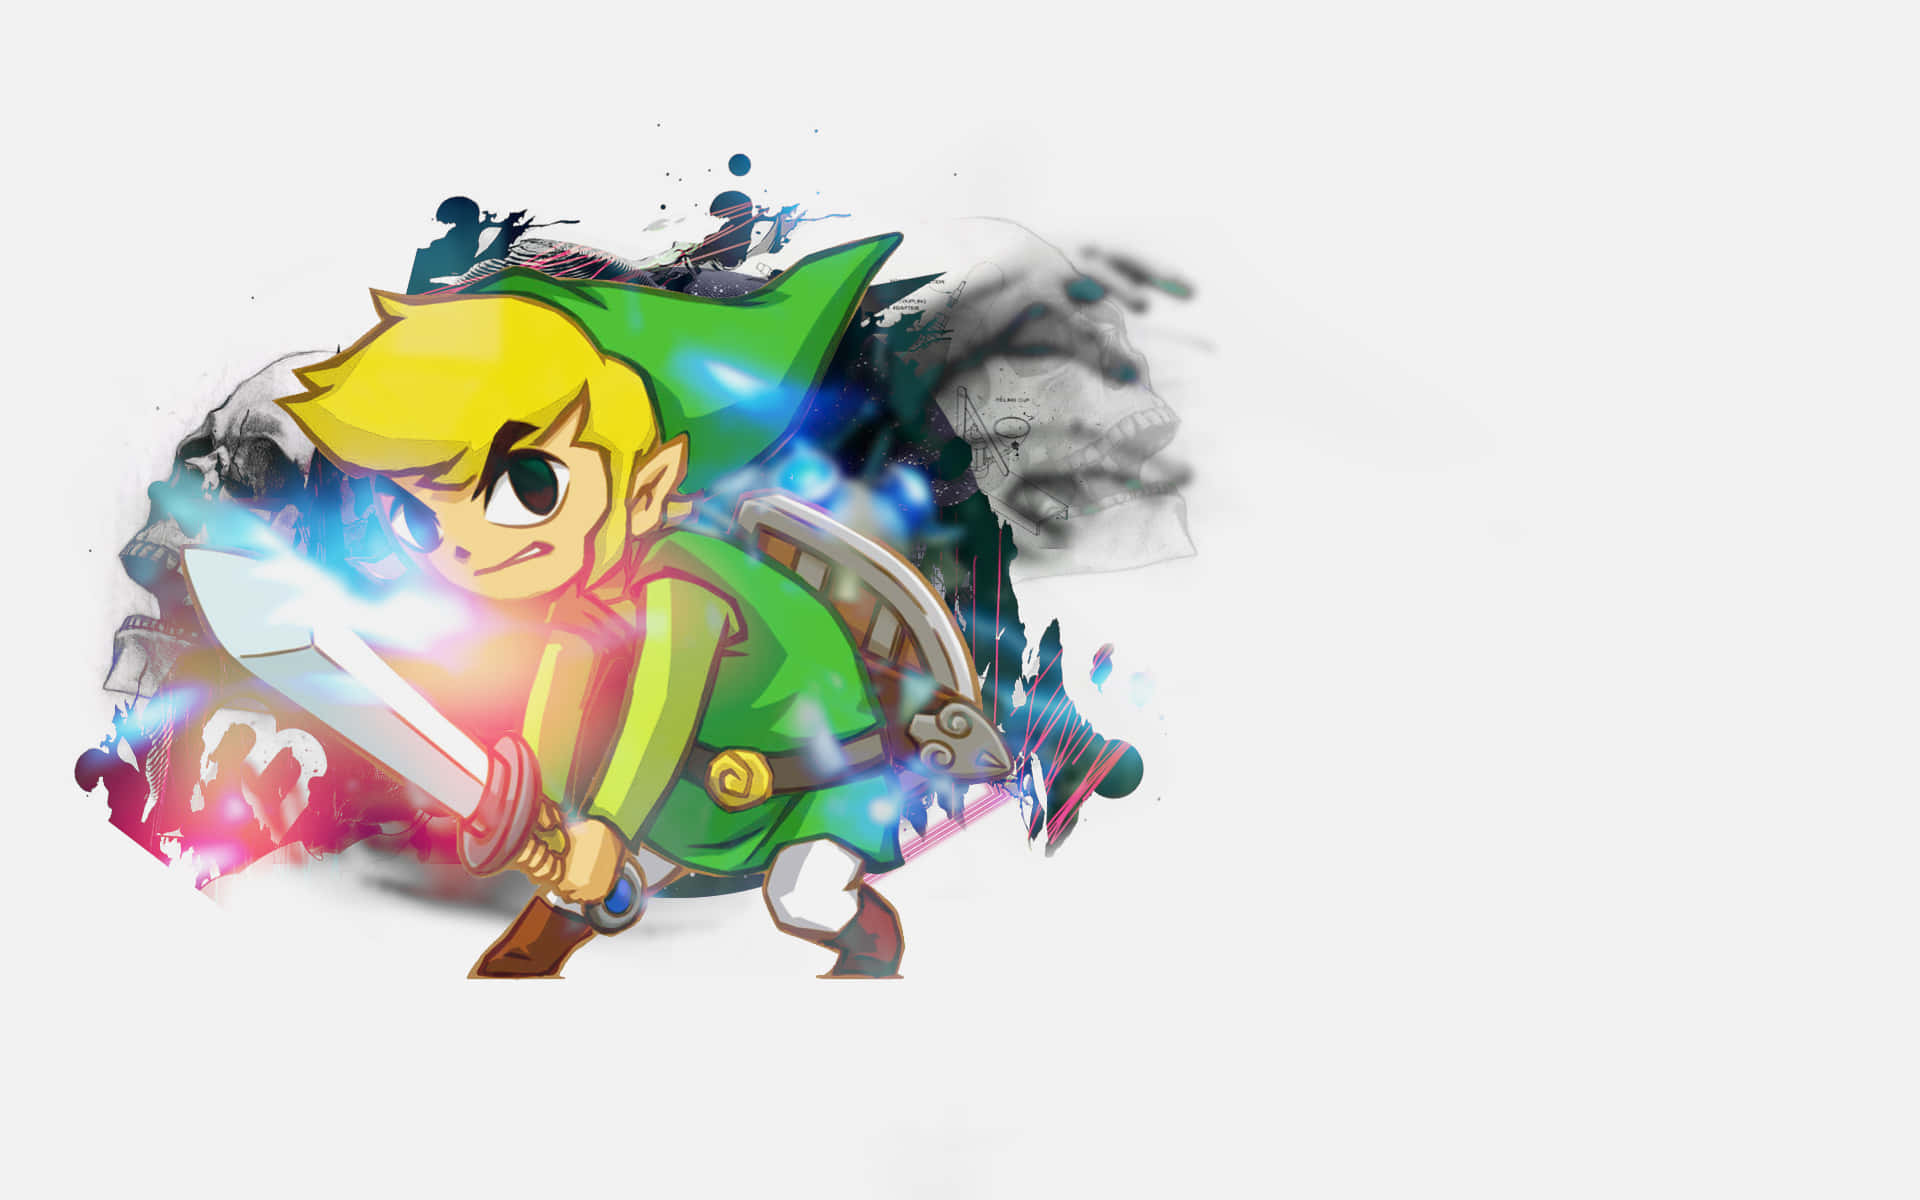 Toon Link Ready To Brave Any Adventure!